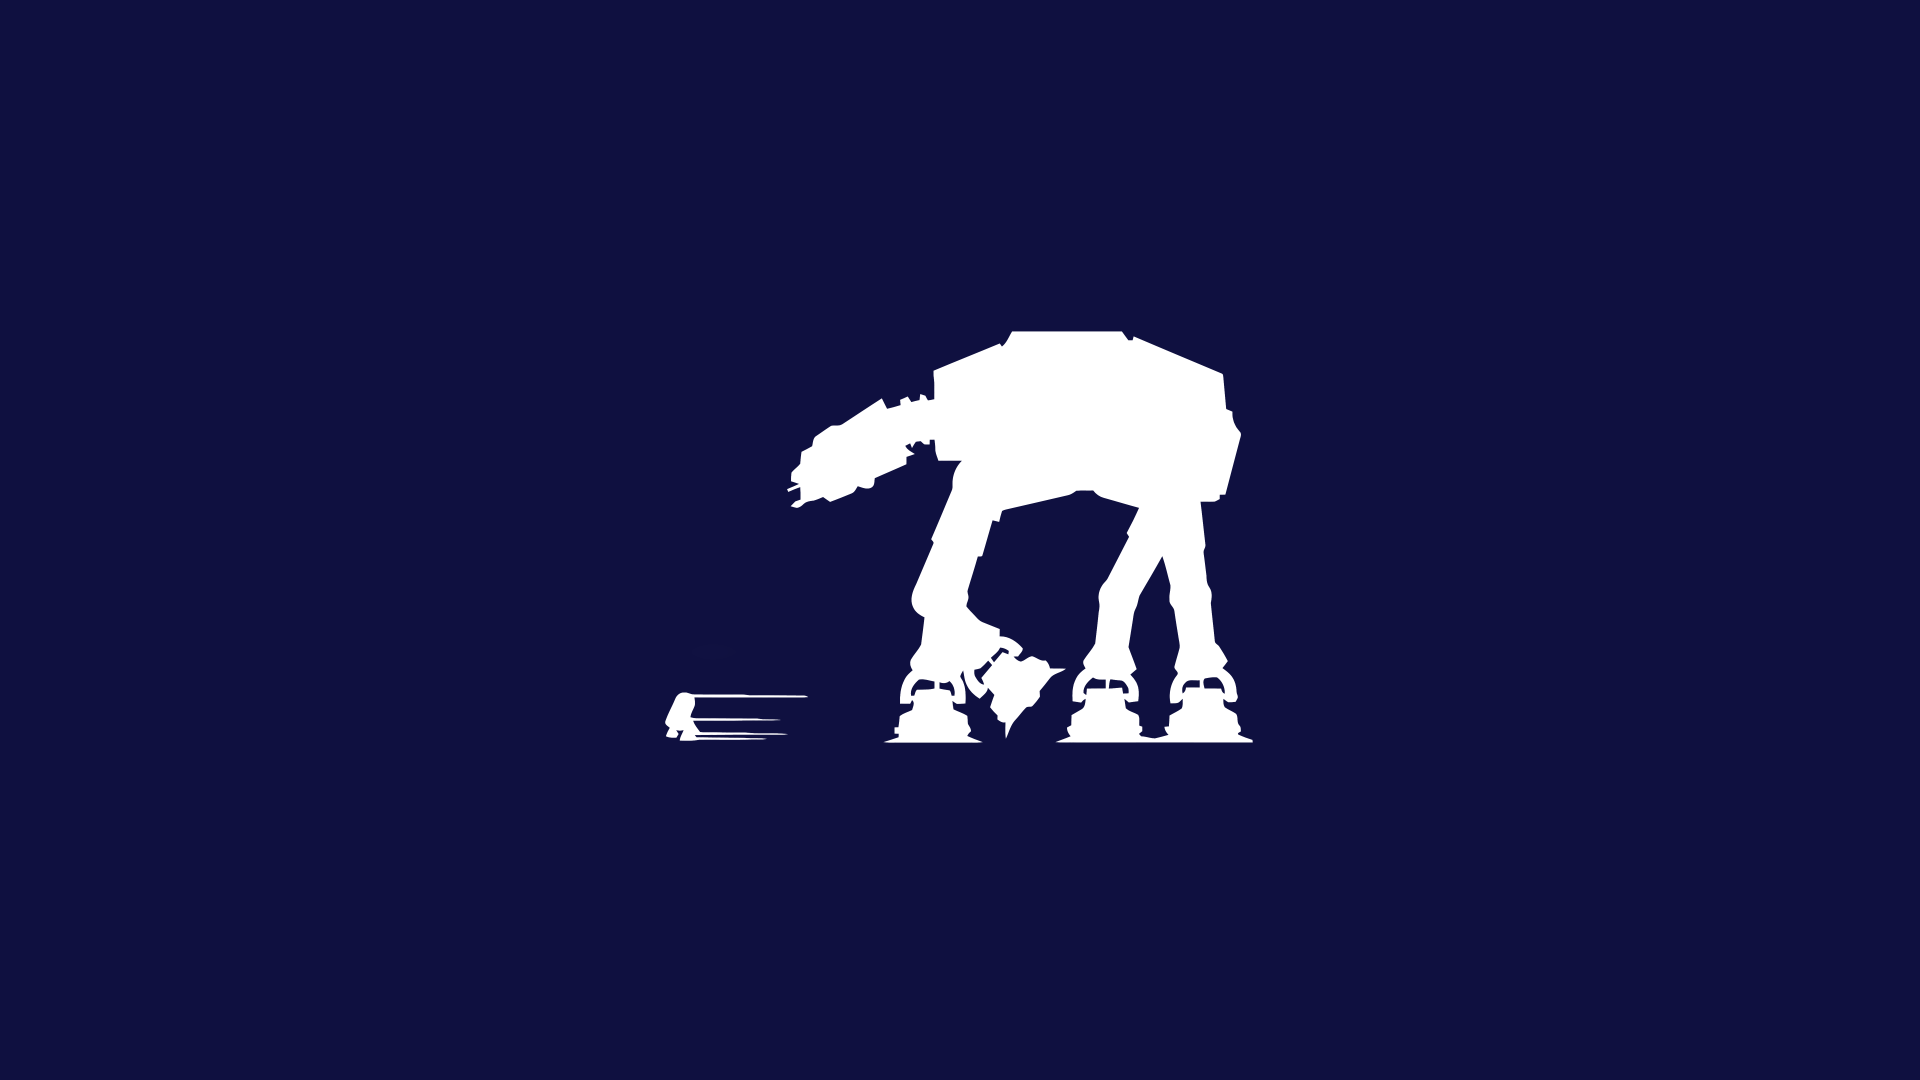 Funny Star Wars Wallpapers - Wallpaper Cave